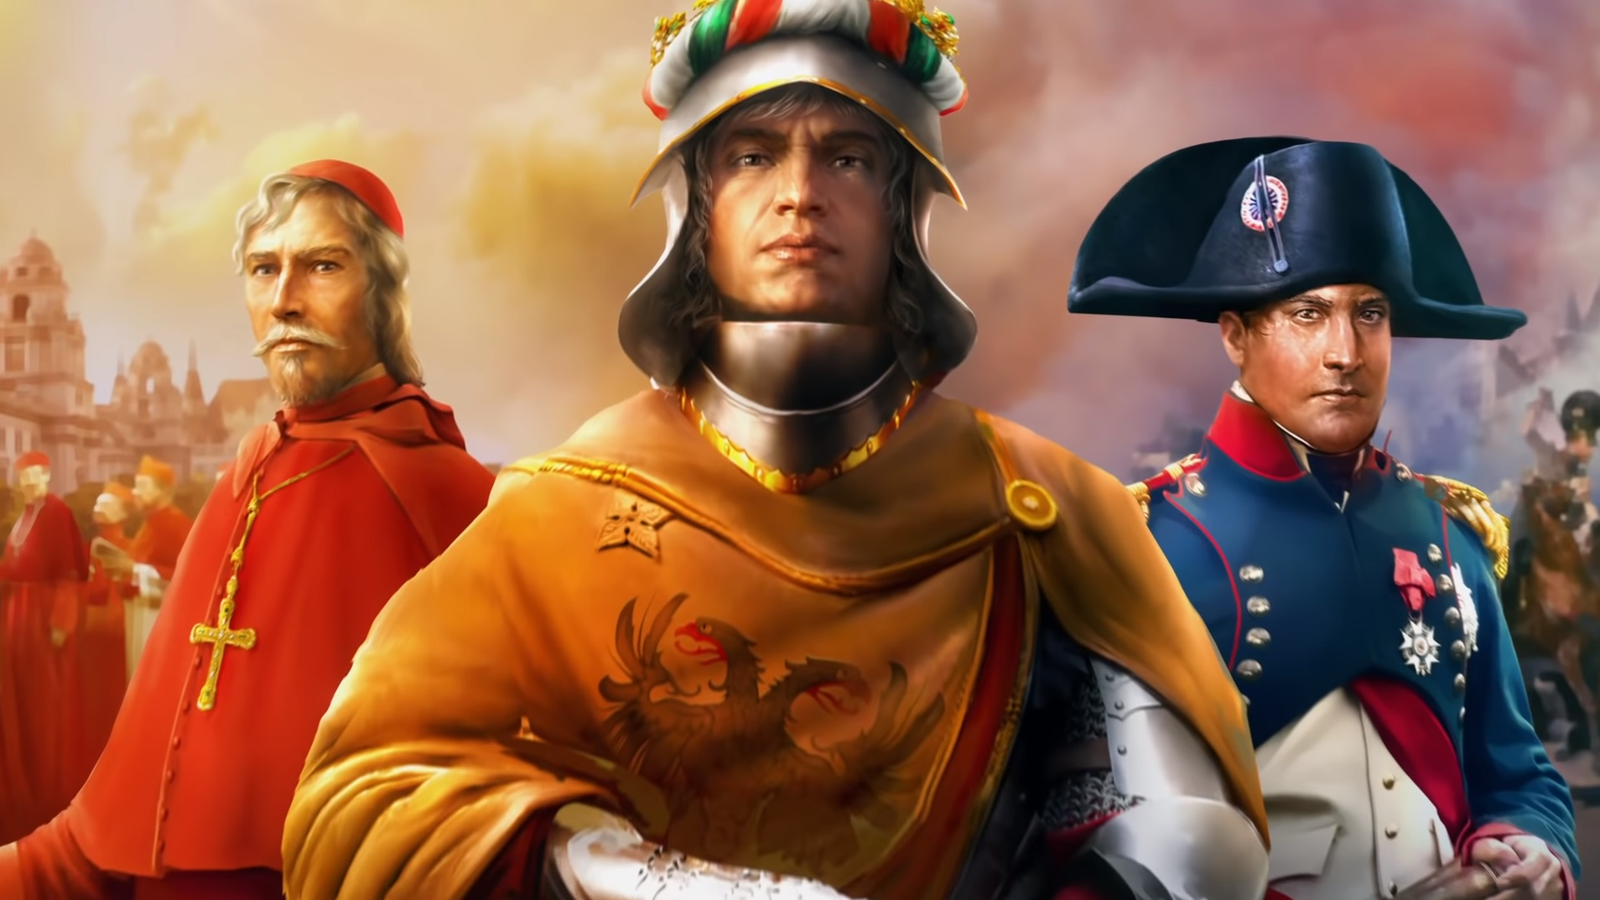 Europa Universalis IV: Emperor expansion out now